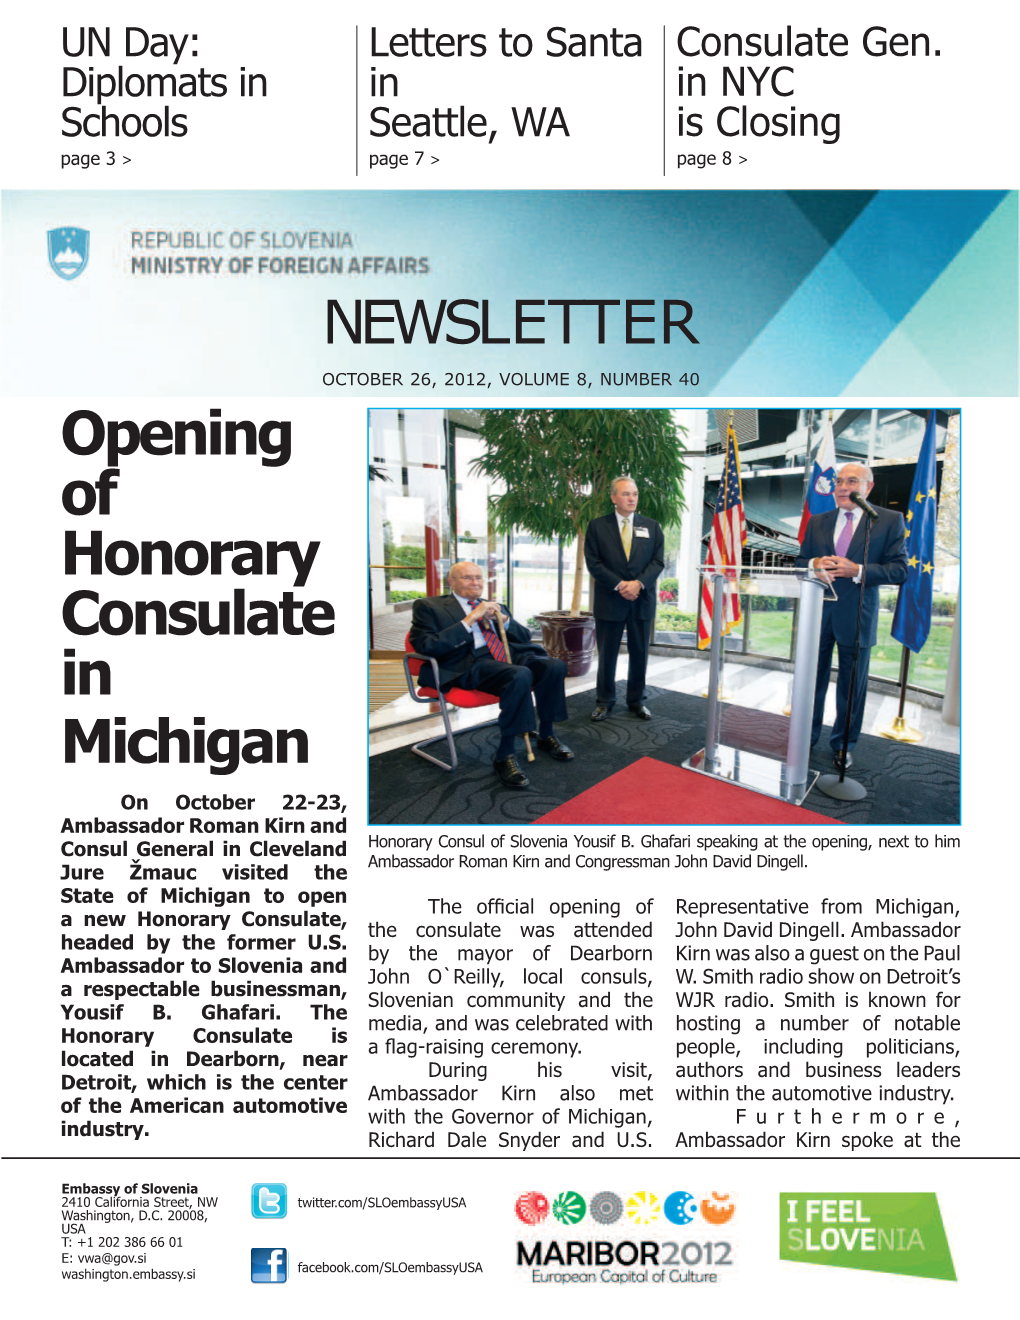 NEWSLETTER Opening of Honorary Consulate in Michigan